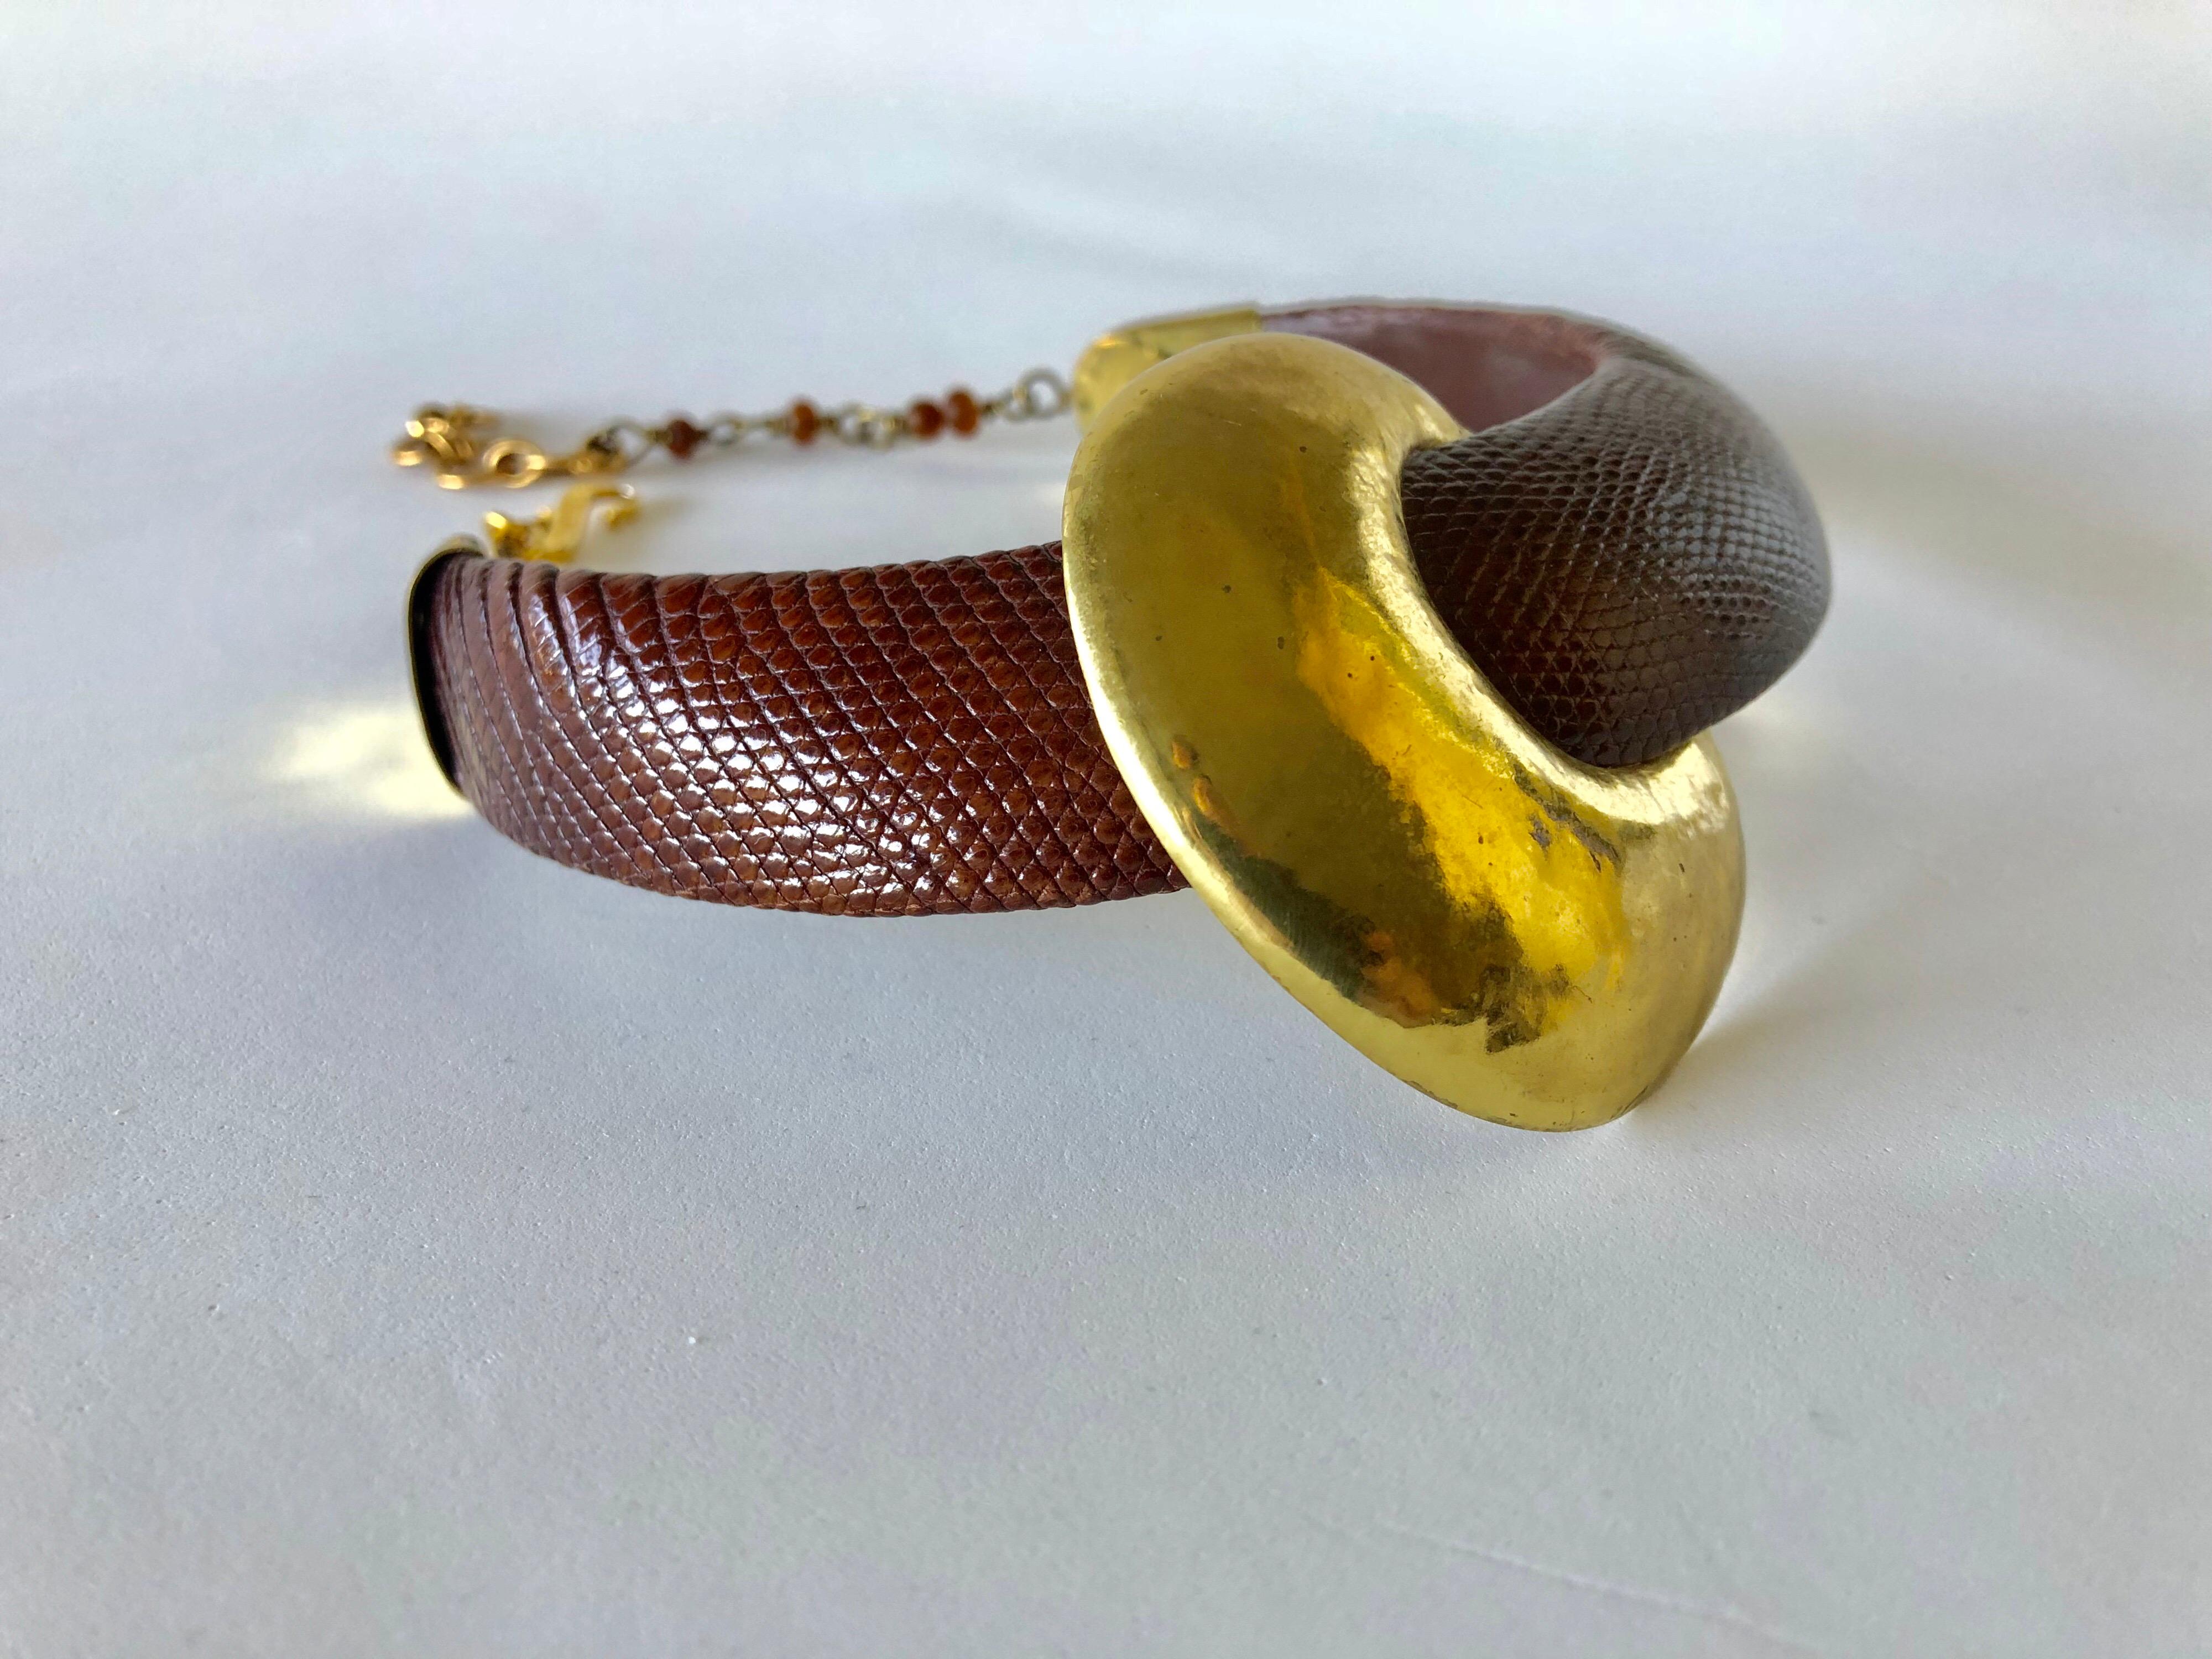 Chic, sleek and contemporary vintage statement necklace comprised of brown snake-skin accented by a large hammered gold brass modernist adornment. The scarce and unique necklace was designed in the 1980s for Fabrice Paris - signed on the back of the